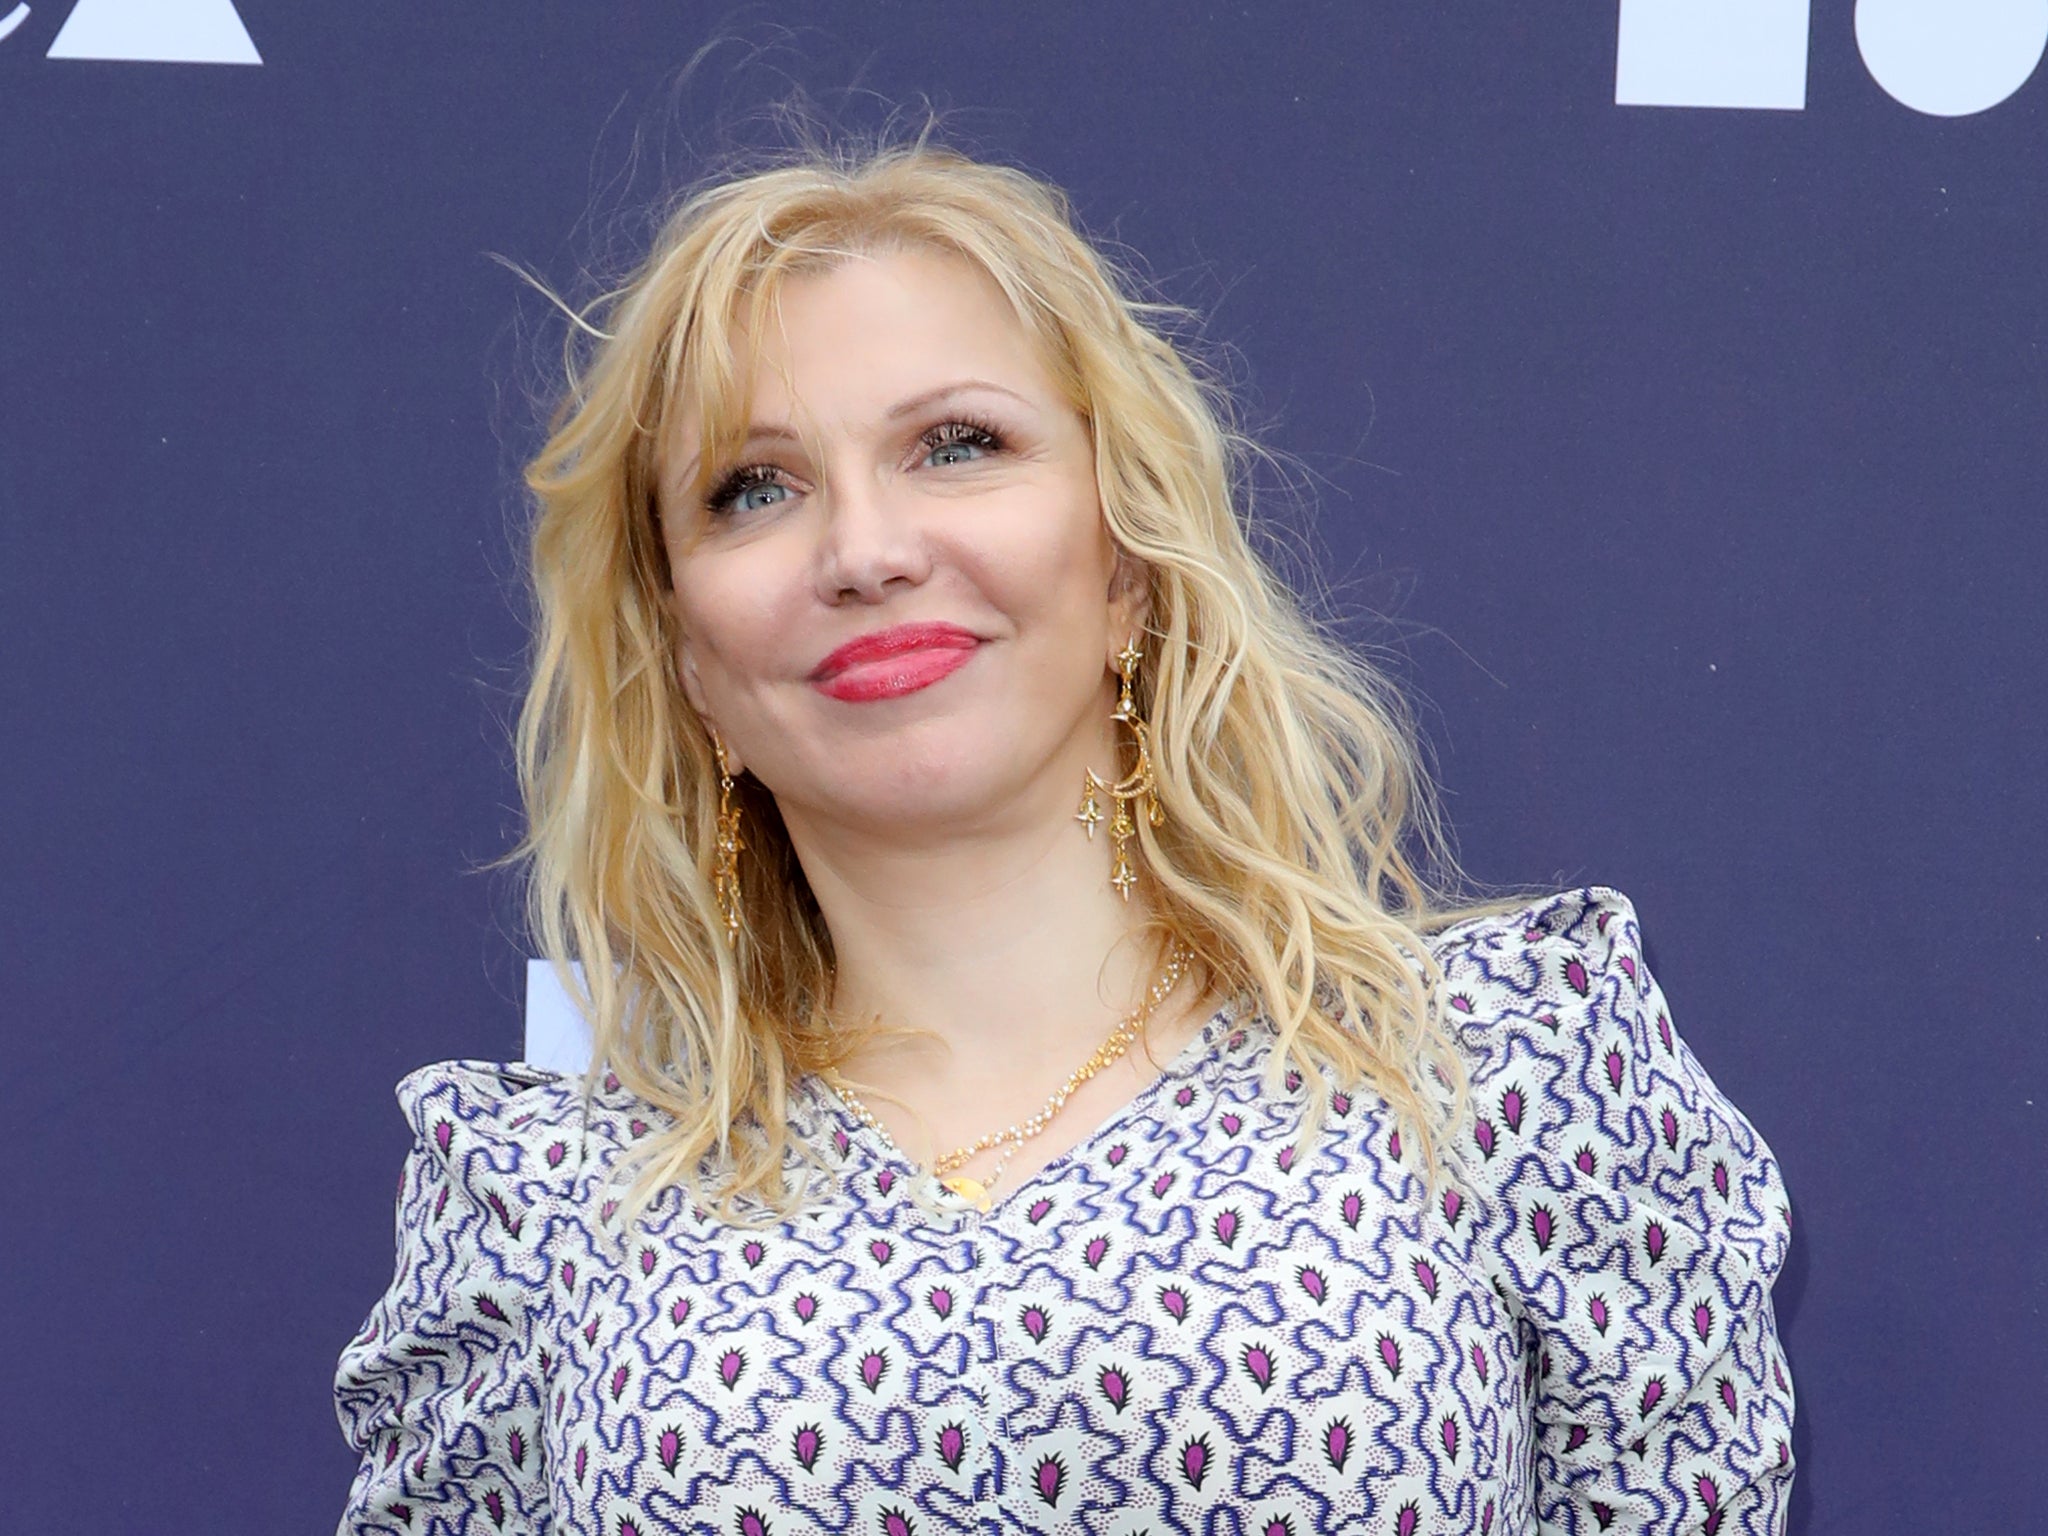 Courtney Love at an event in 2019